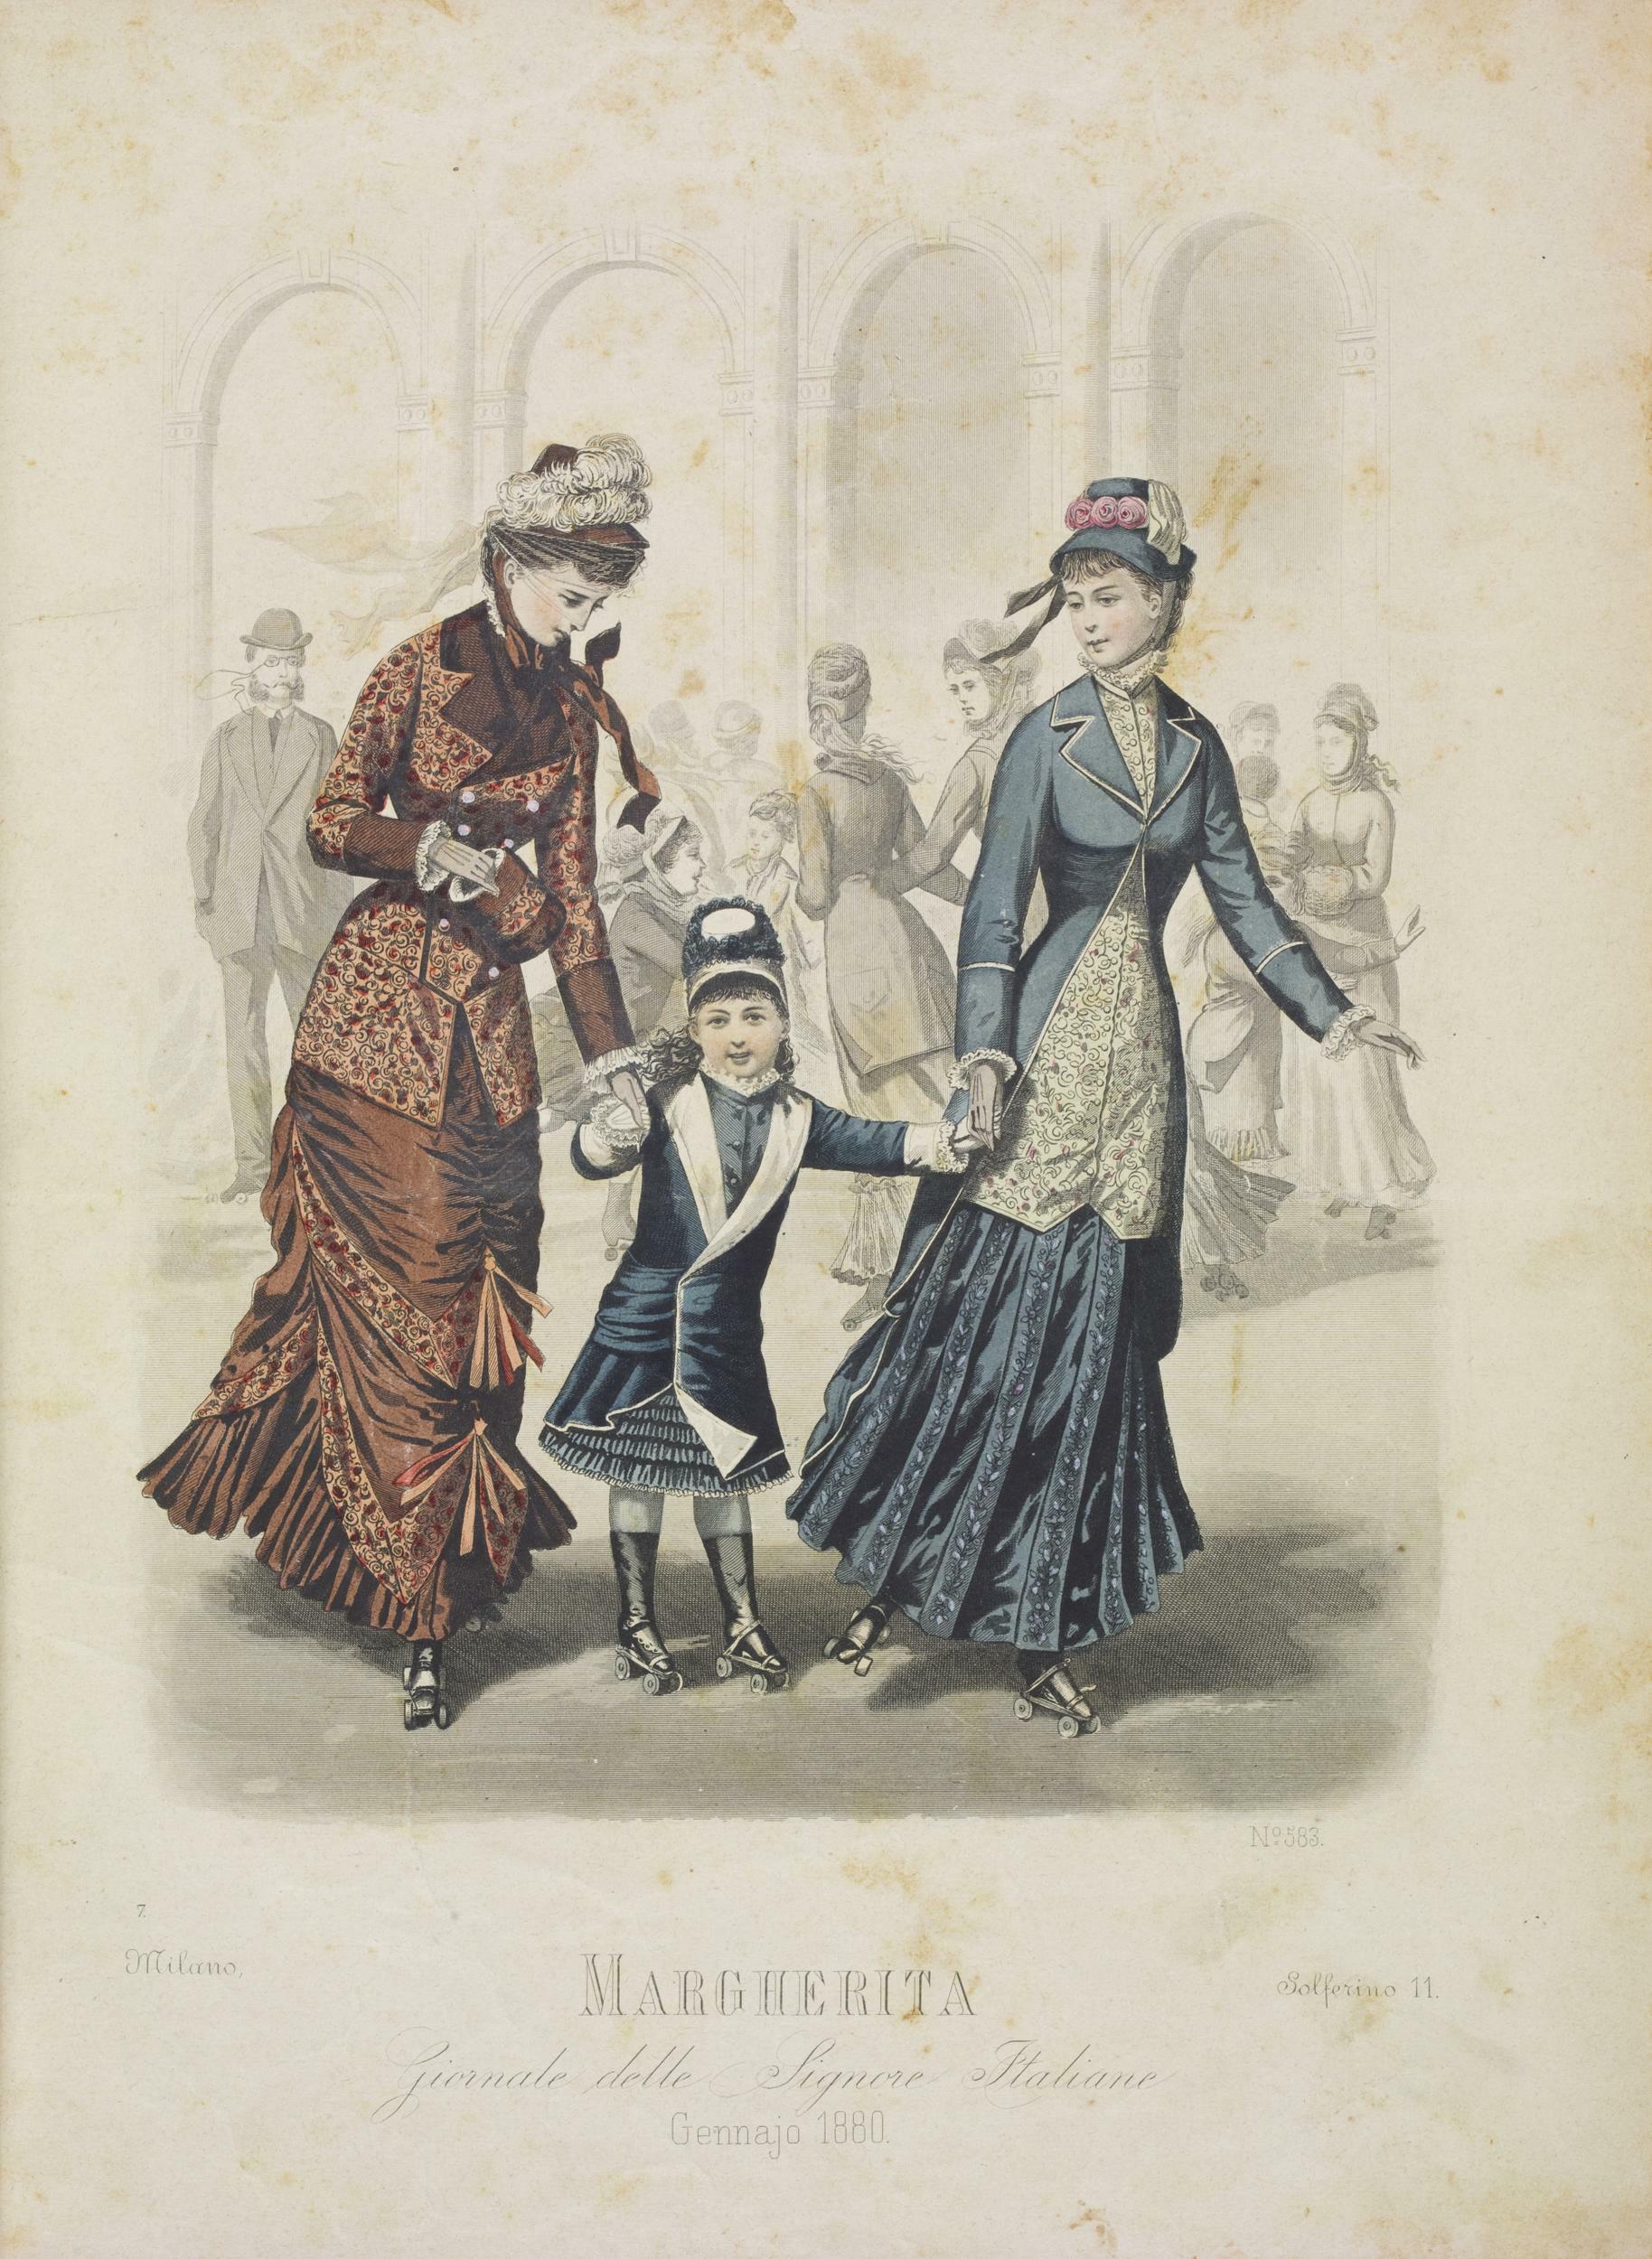 Fashion plate from an Italian women's magazine Margherita showing roller skating in an indoor rink, January 1880